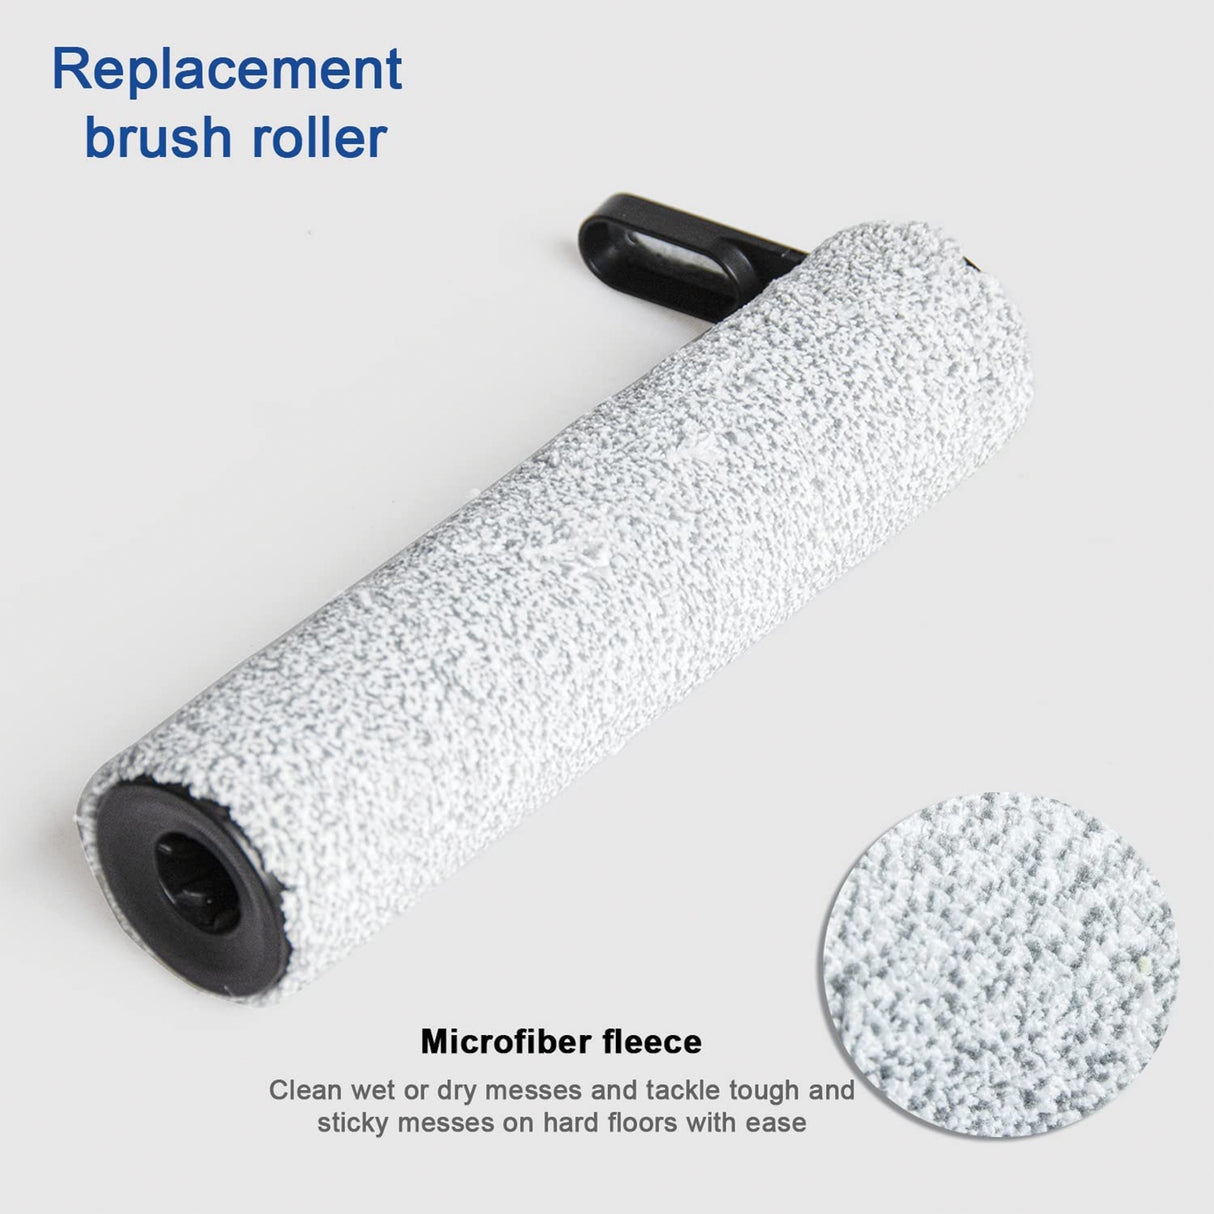  Replacement Brush Roller and Vacuum Filter For Tineco